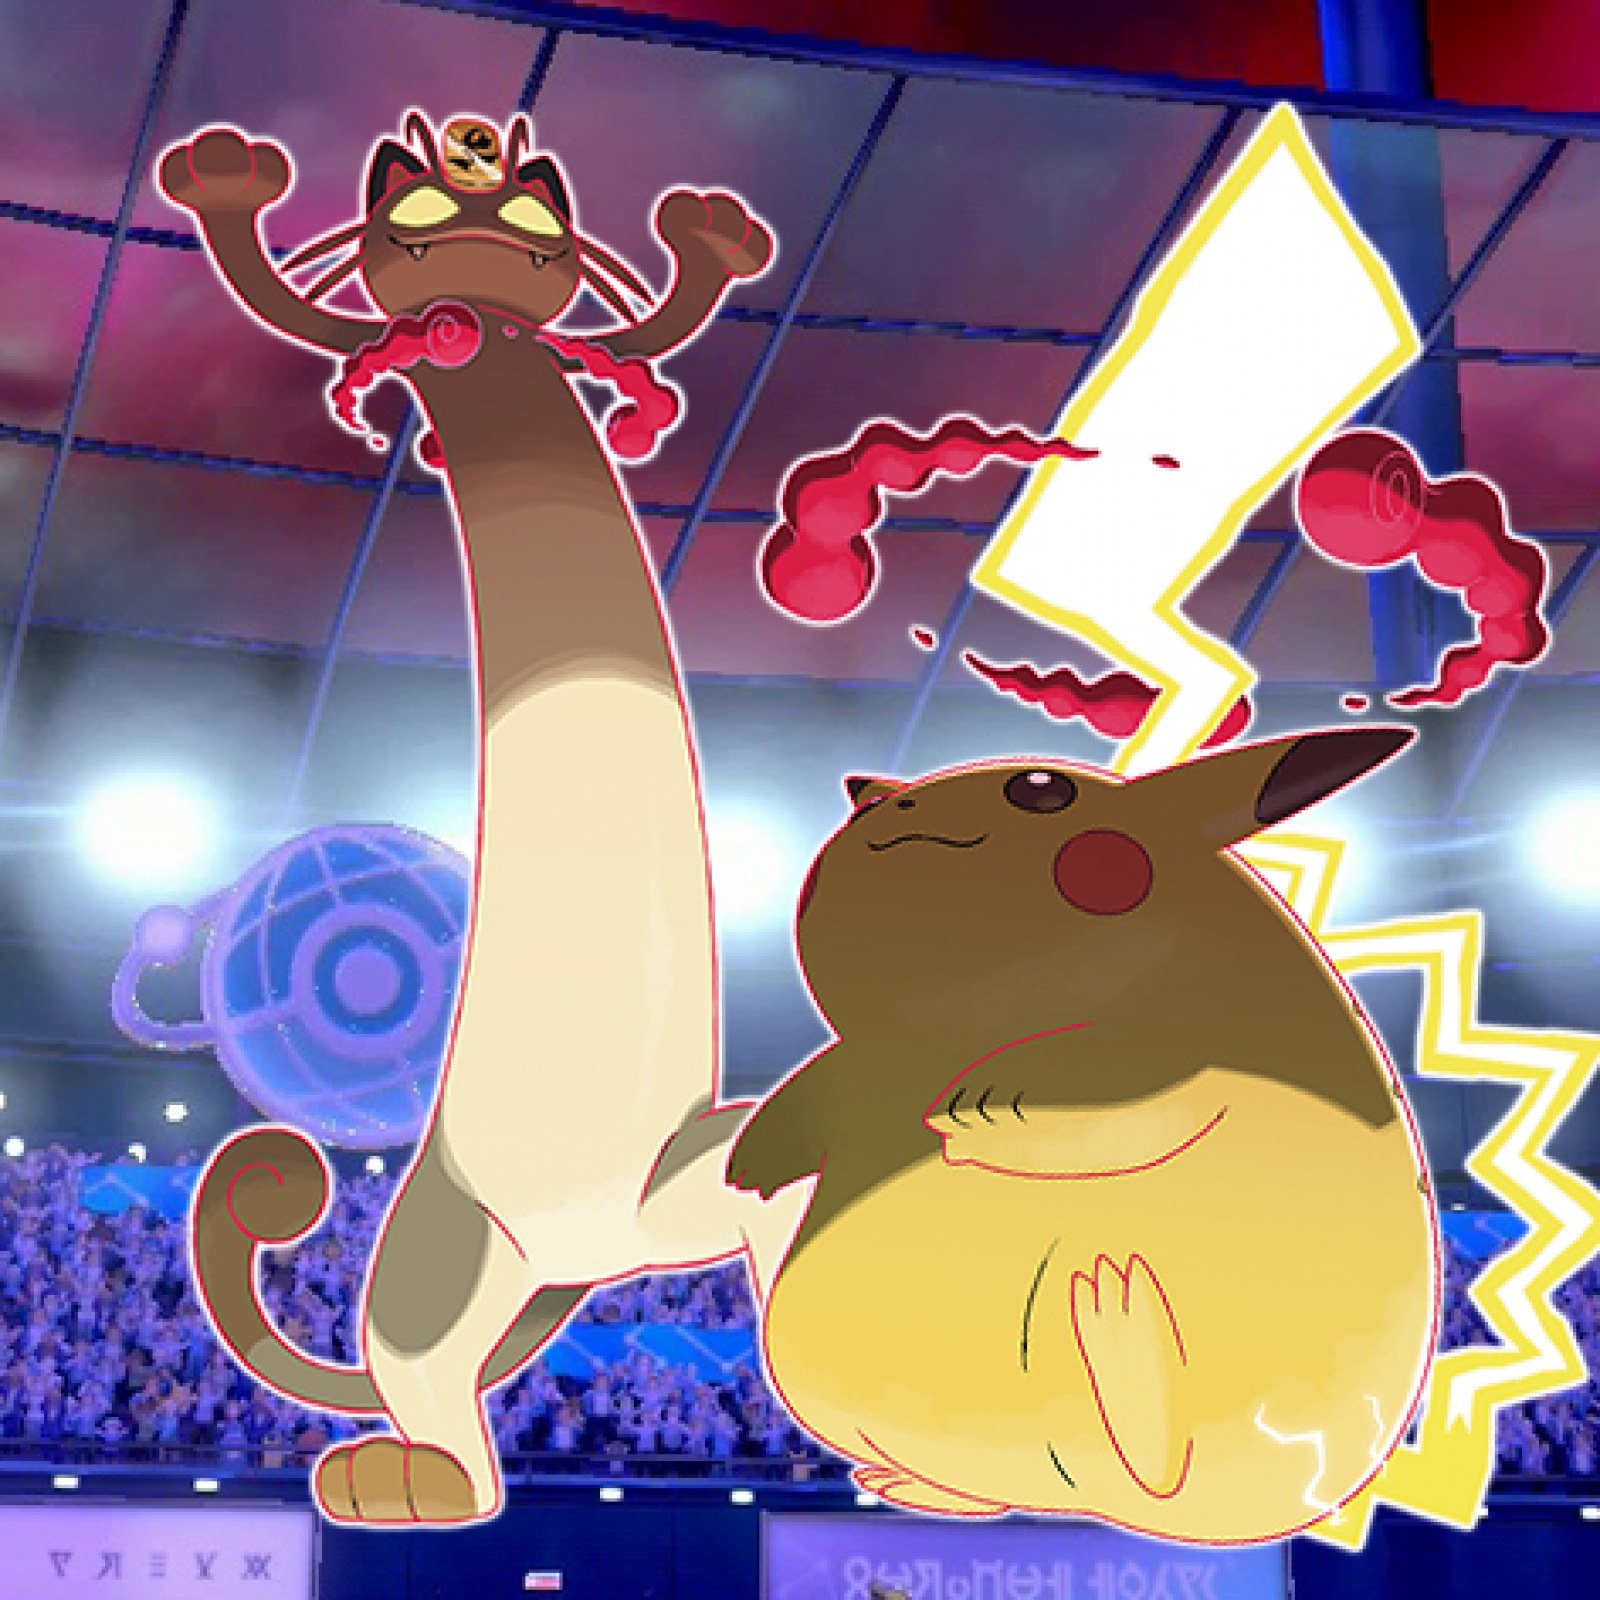 Gigantamax Meowth And Pikachu Were In That One Pokémon